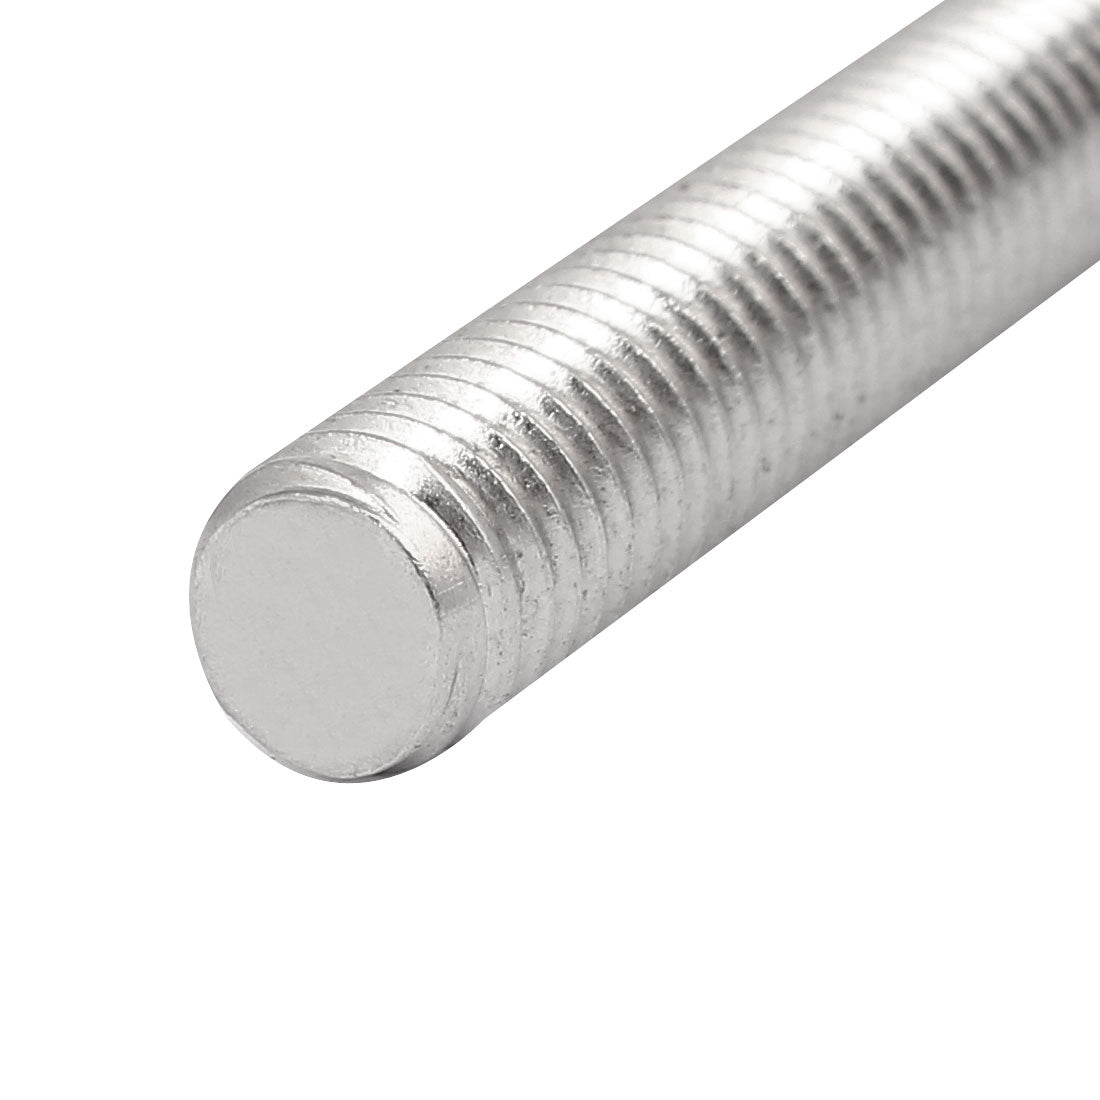 uxcell Uxcell M8 x 90mm 304 Stainless Steel Fully Threaded Rods Fasteners Silver Tone 10 Pcs